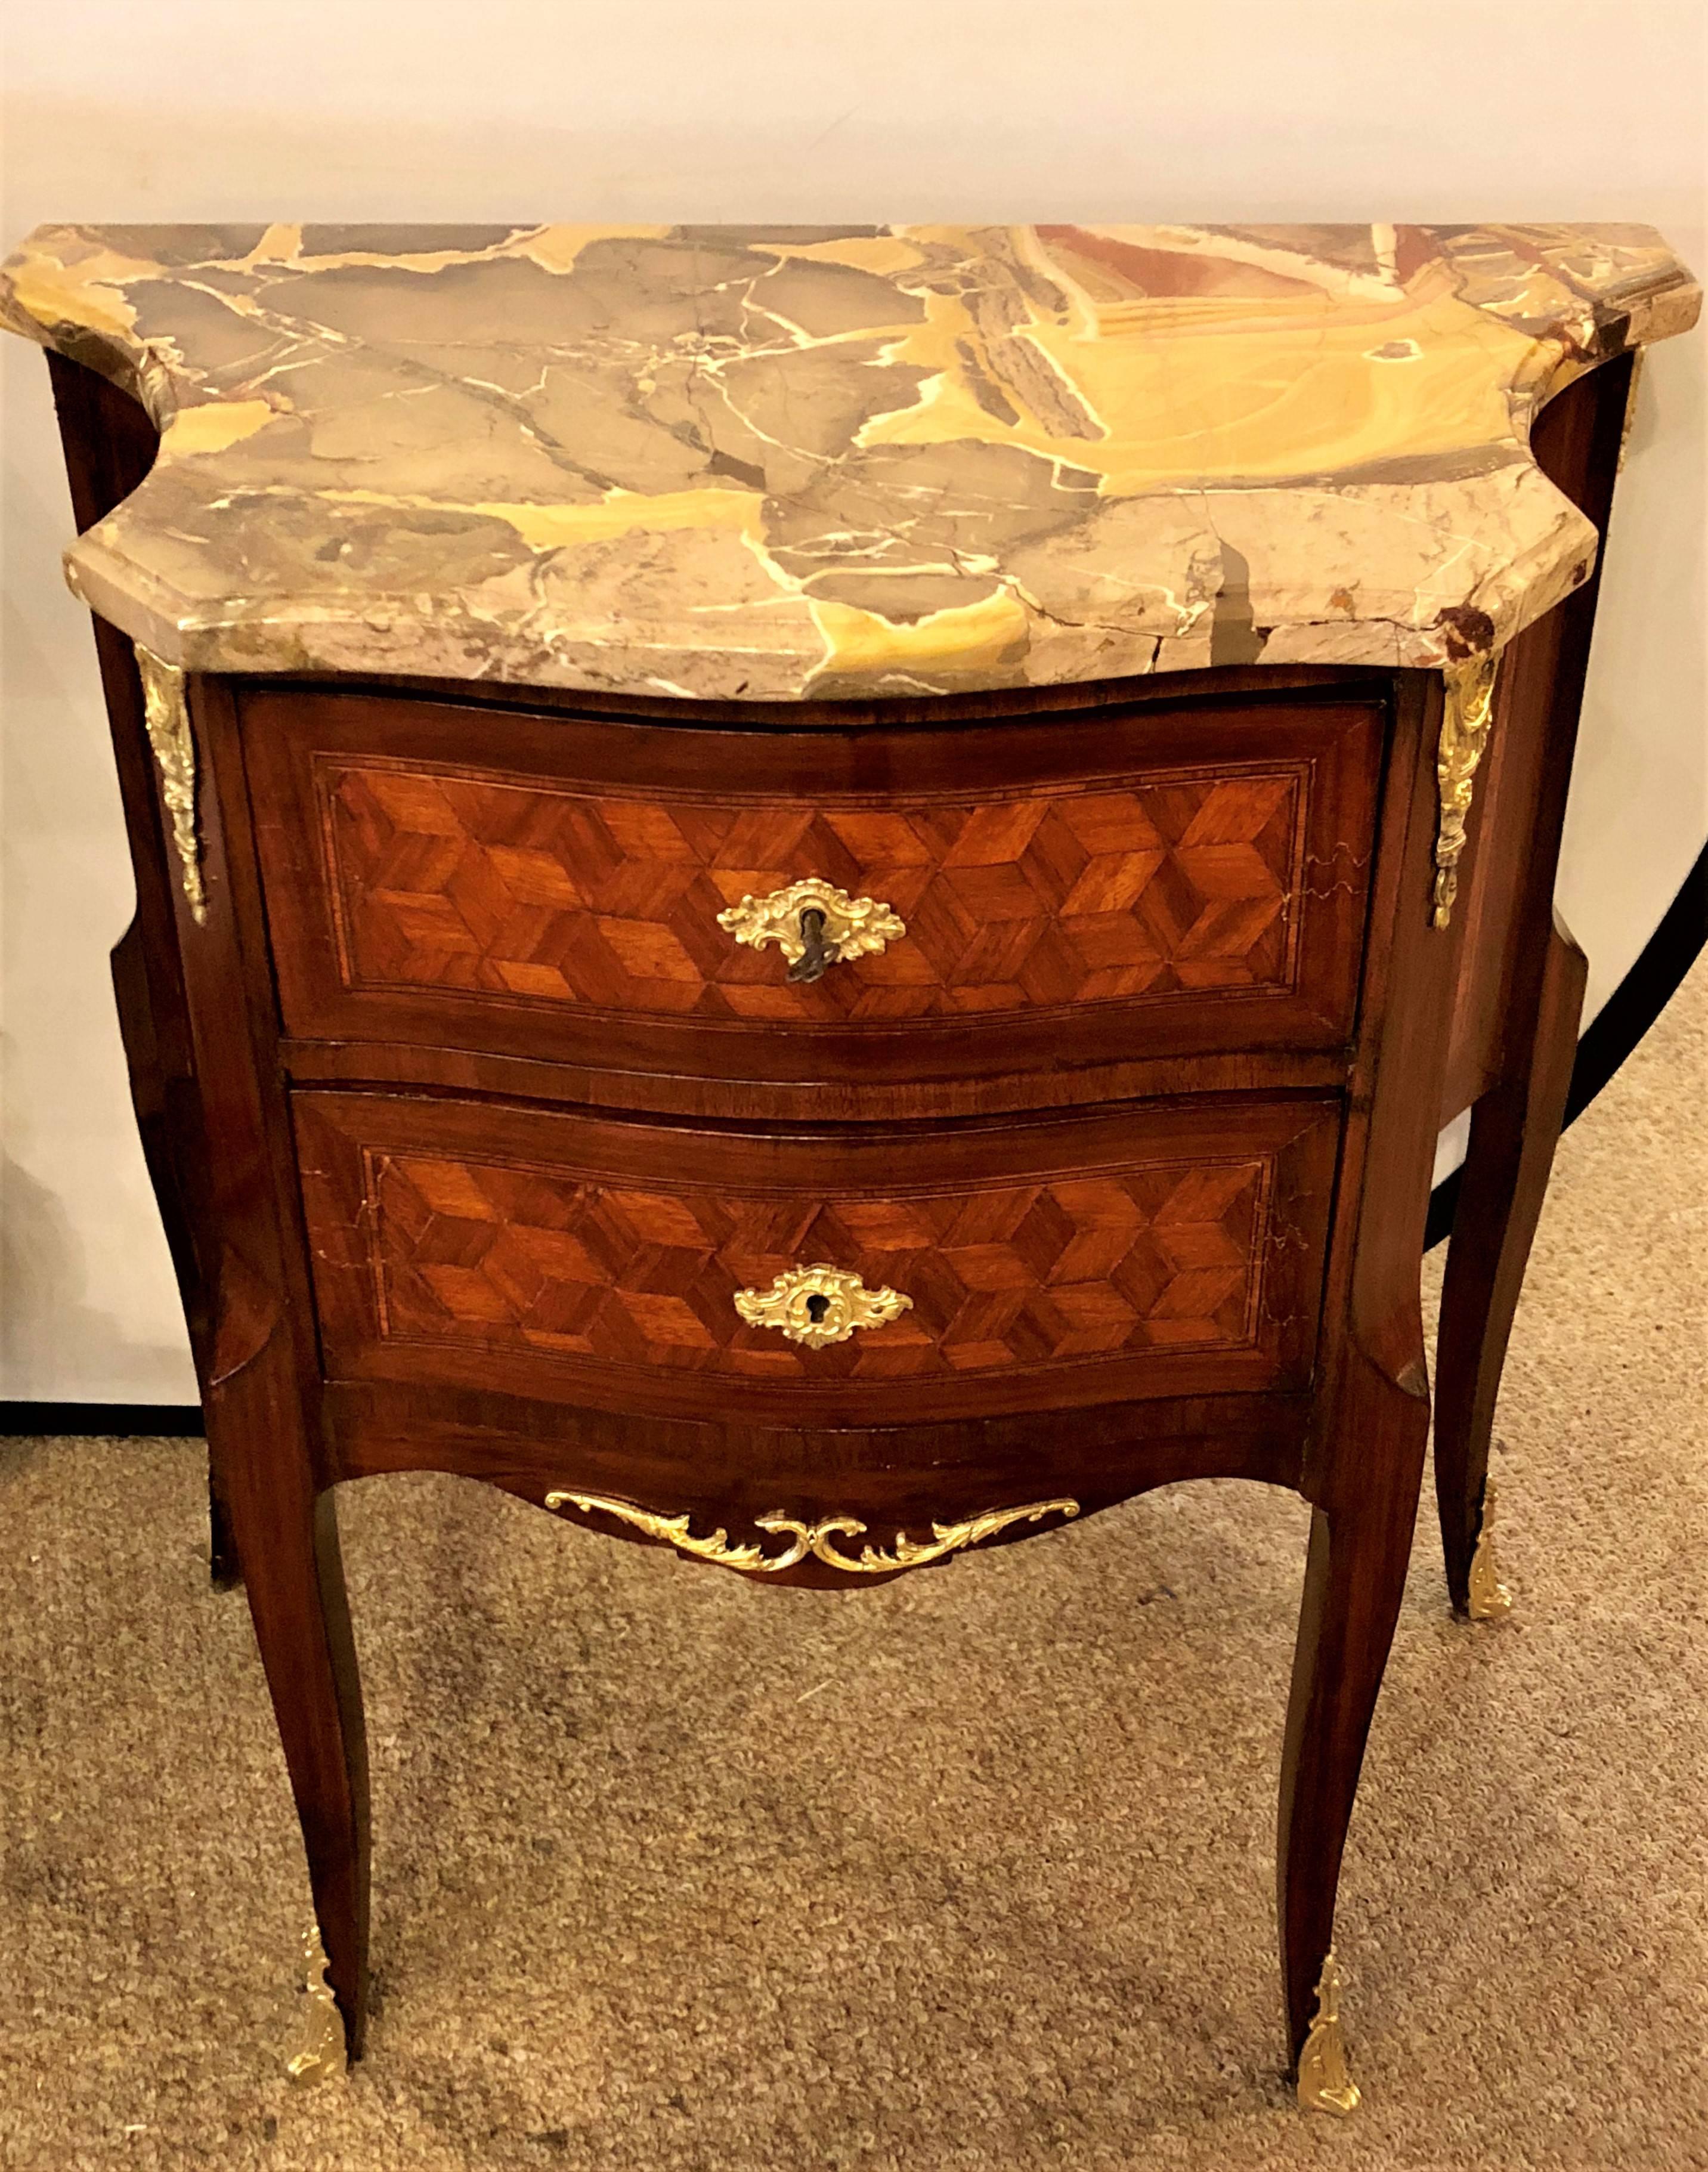 A pair of French marble top two drawers bronze-mounted tables or nightstands. Each Louis XV style stand having two parquet inlaid drawers and marble tops in a kidney shaped form with inverted sides. Both have been professionally hand rubbed French